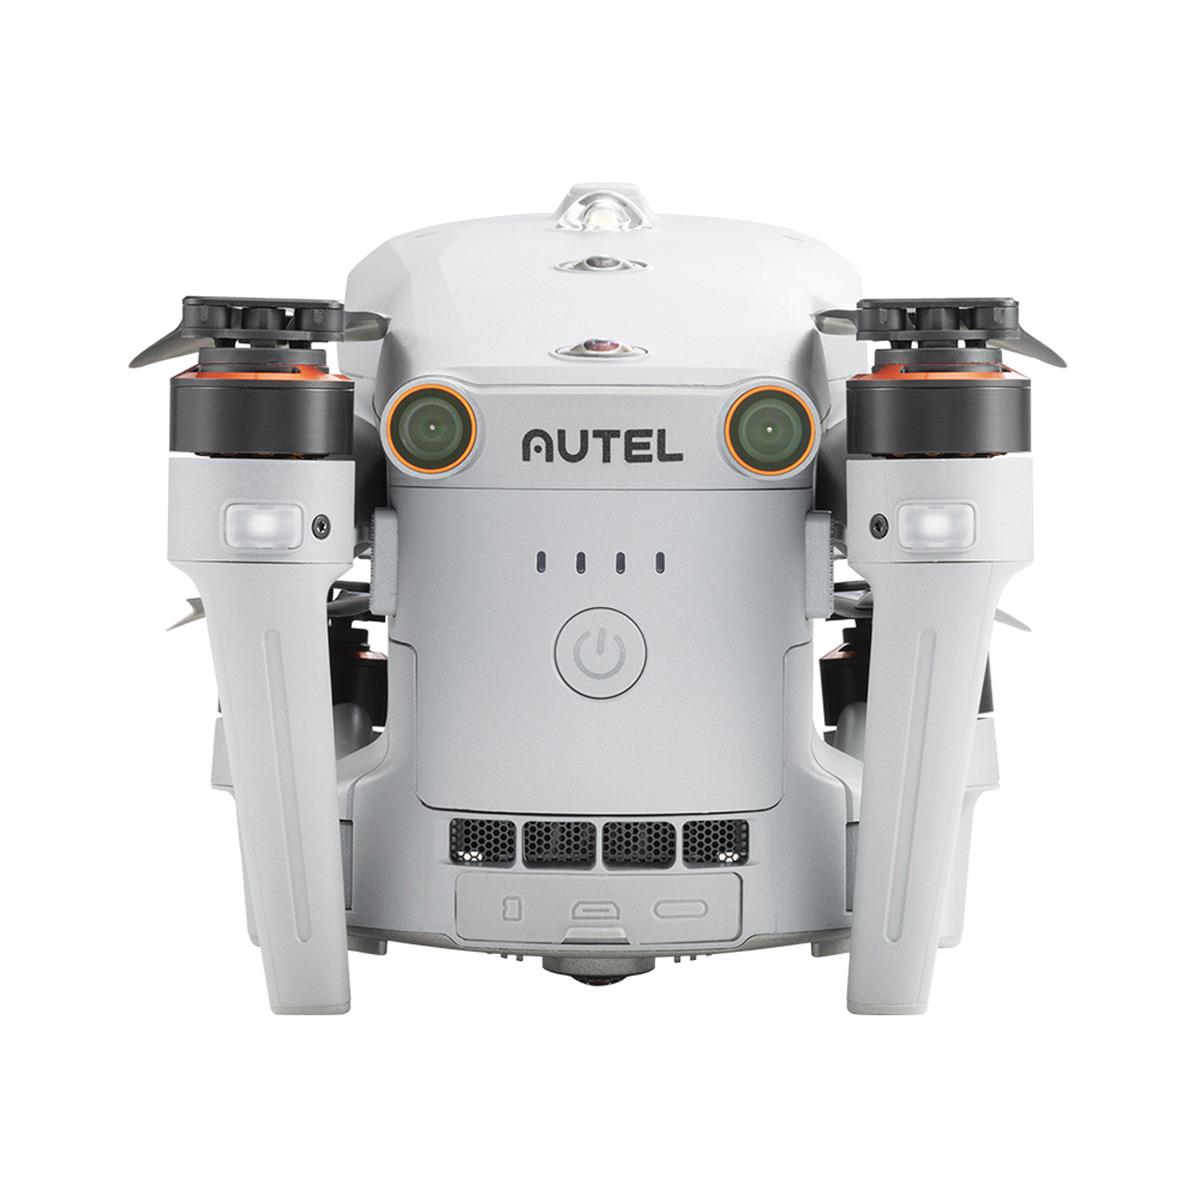 Autel Robotics EVO Max 4T Autel Robotics EVO Max 4T Industrial Drone with Smart Controller V3 Autel Florida Drone Supply Autel Robotics EVO Max 4T 8K Drone with Smart Controller